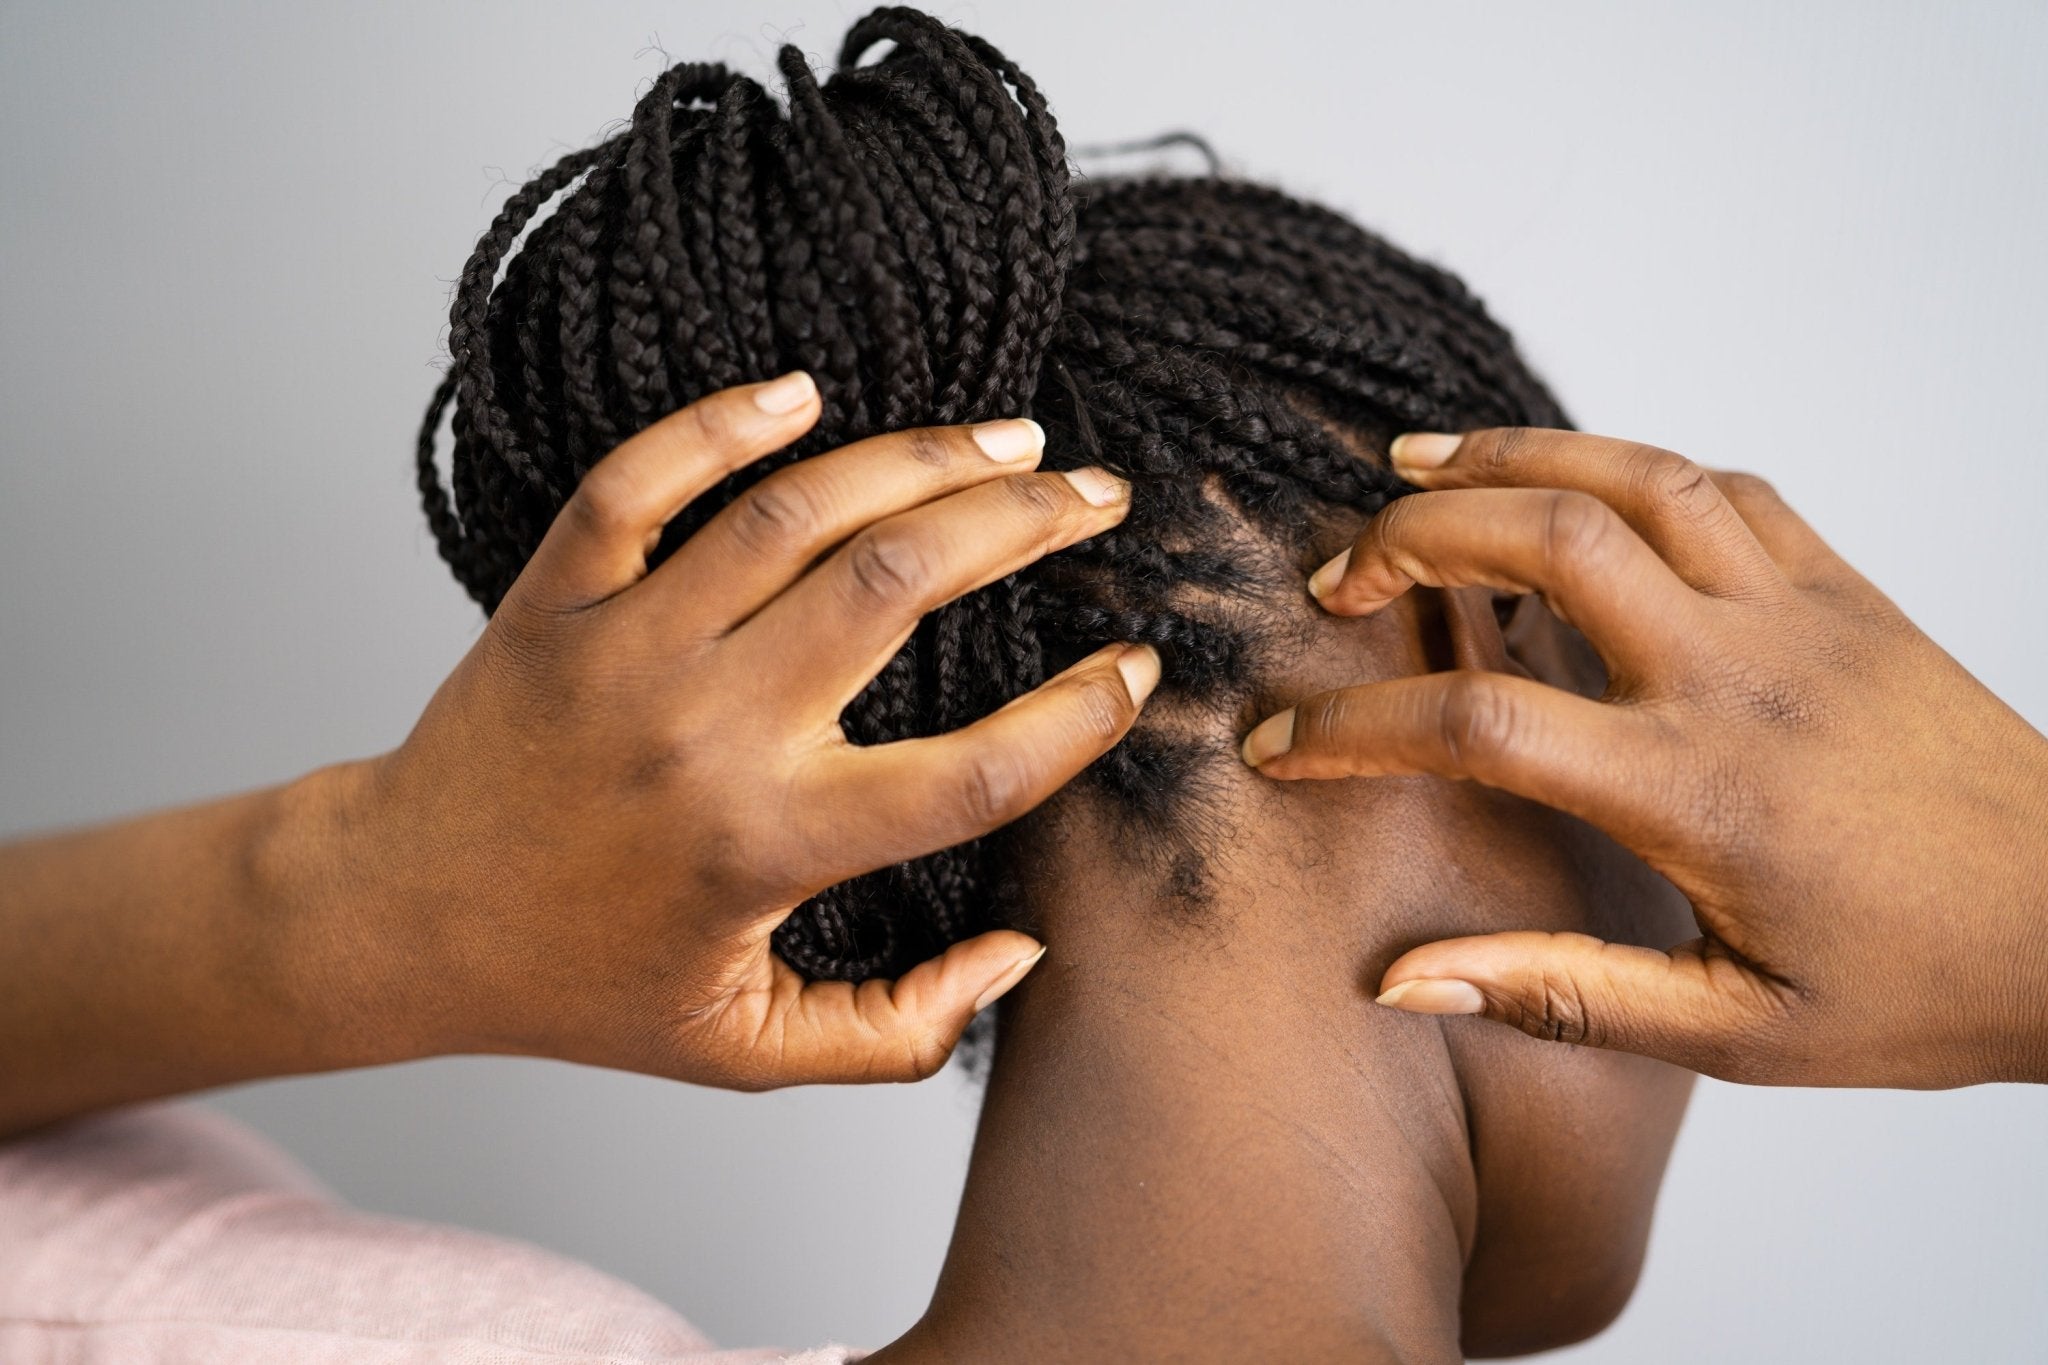 How to treat and nourish your scalp to reduce itchy and irritated scalp